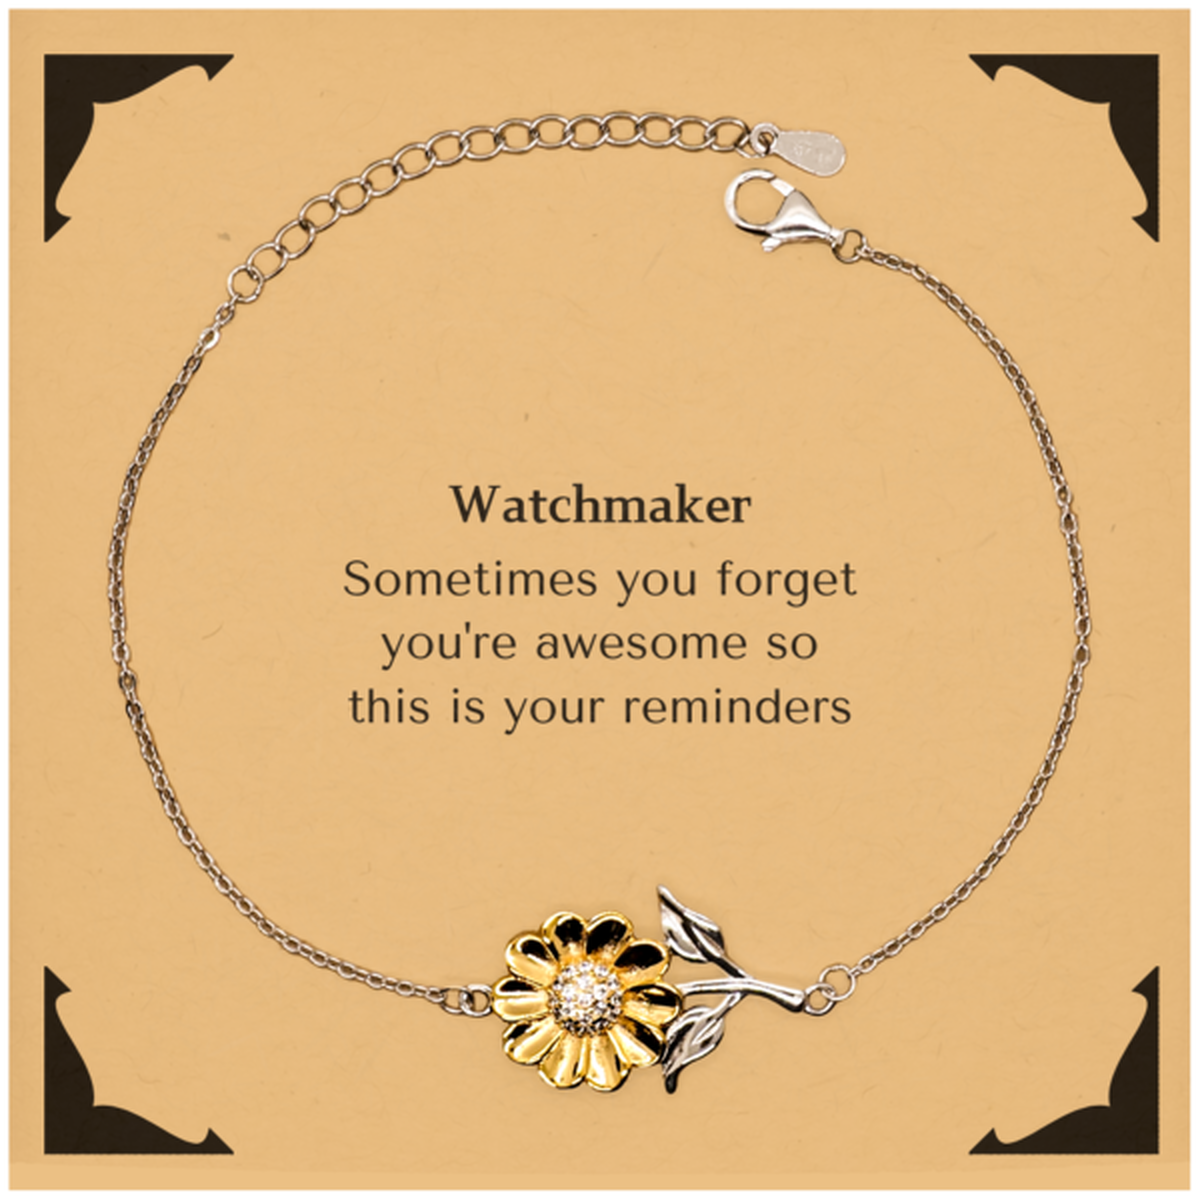 Sentimental Watchmaker Sunflower Bracelet, Watchmaker Sometimes you forget you're awesome so this is your reminders, Graduation Christmas Birthday Gifts for Watchmaker, Men, Women, Coworkers